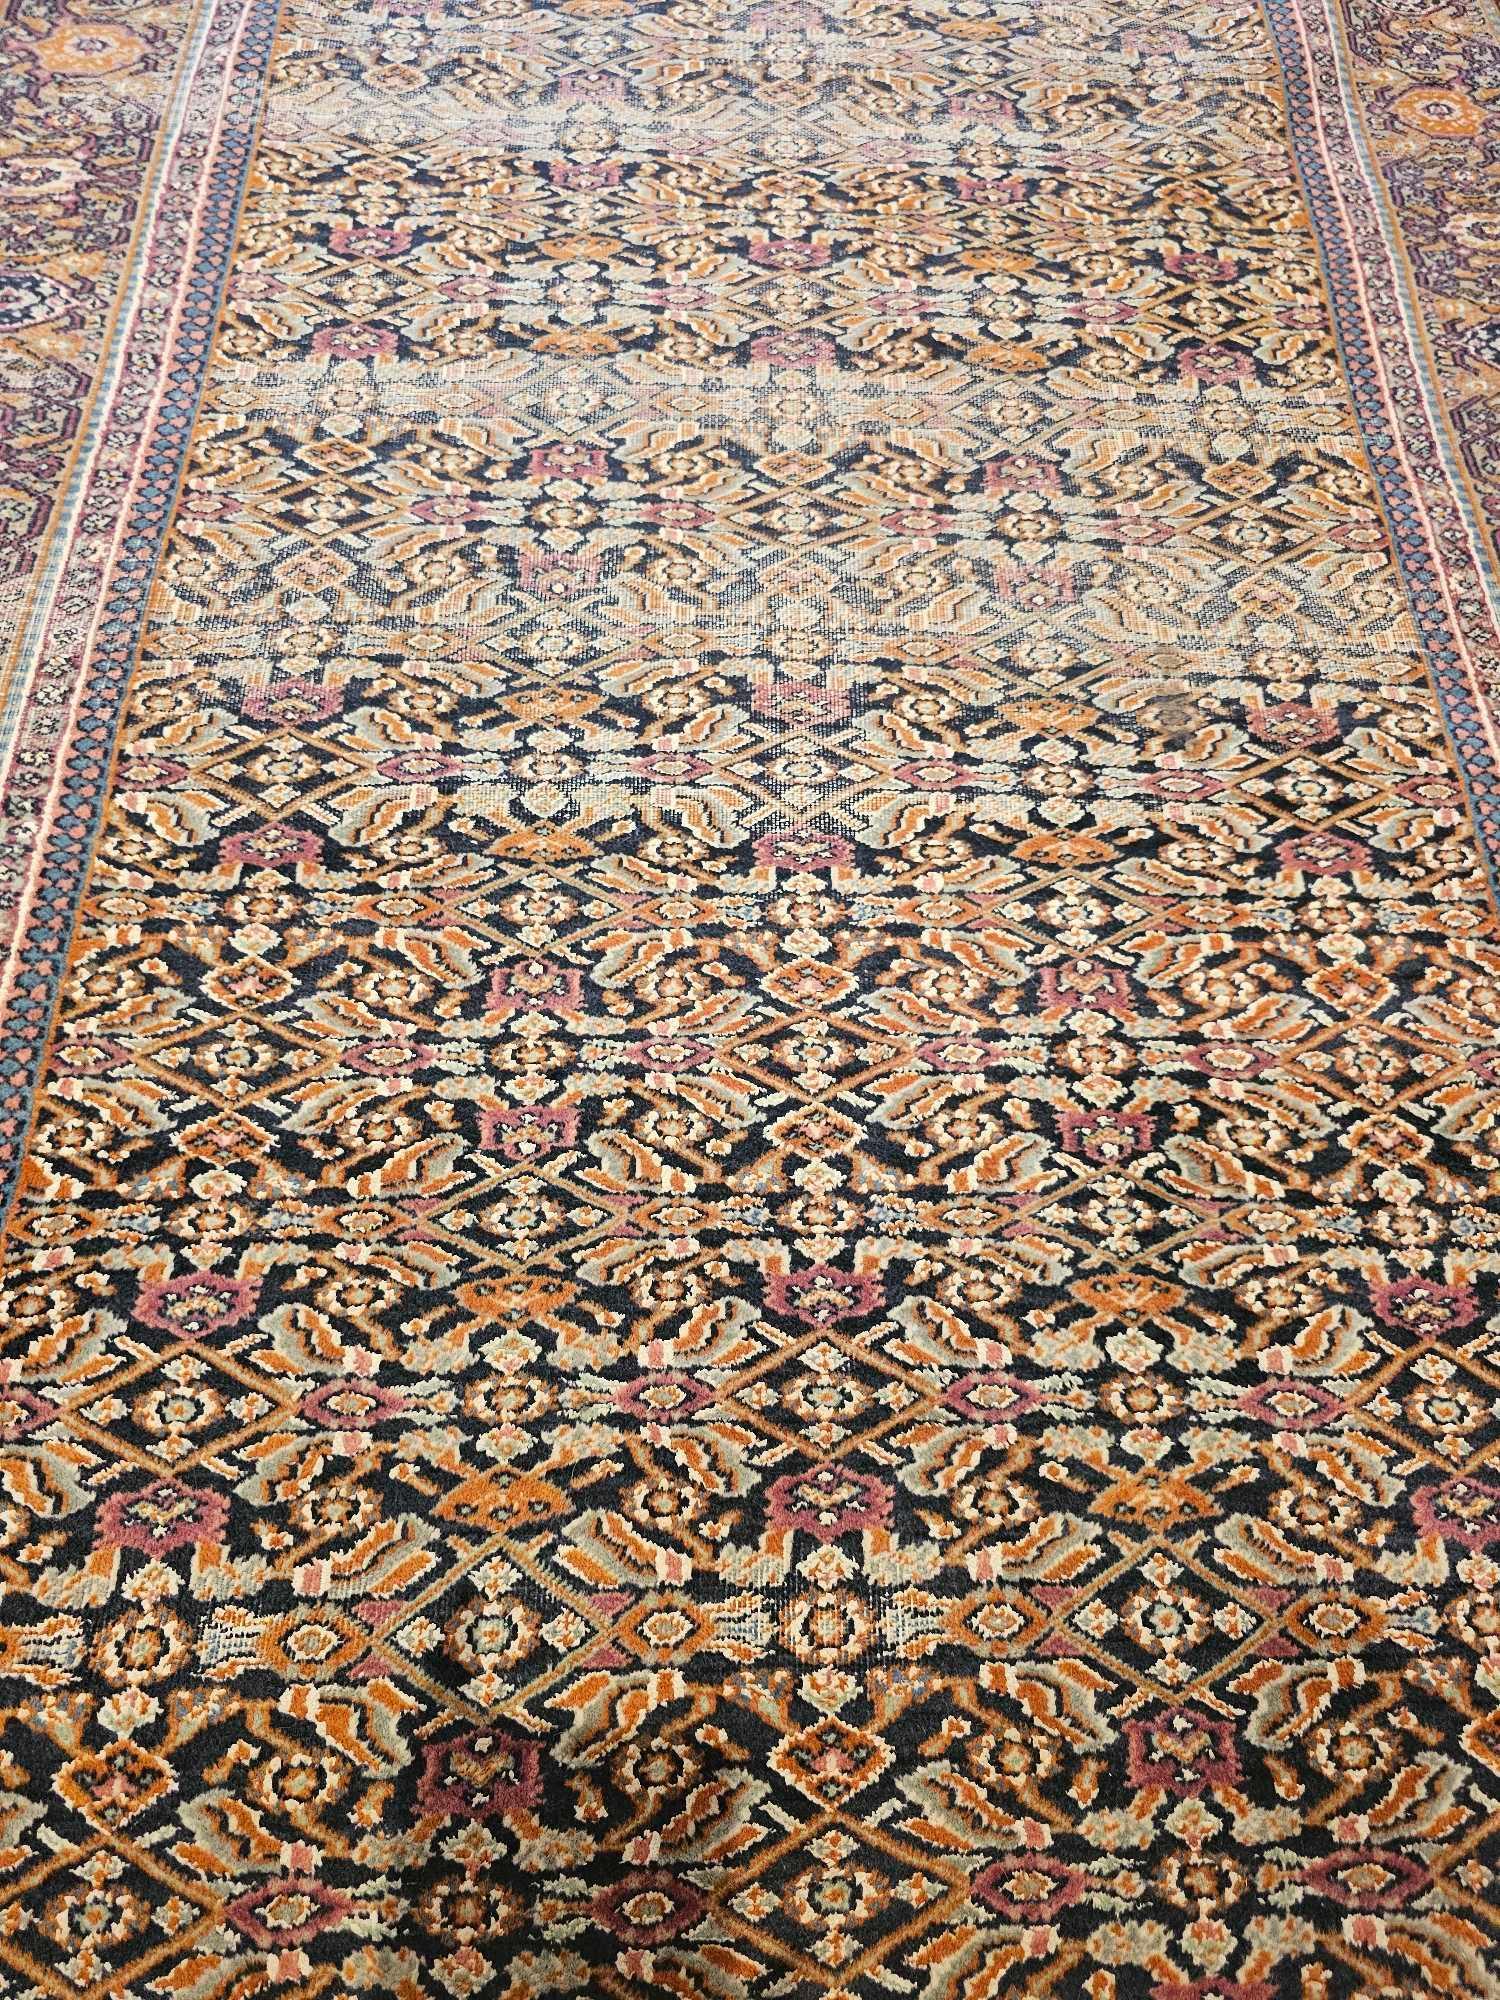 A Tabriz Rug, North West Persia, Wool On Cotton Foundation. The Blue Field With An All-over - Image 6 of 6